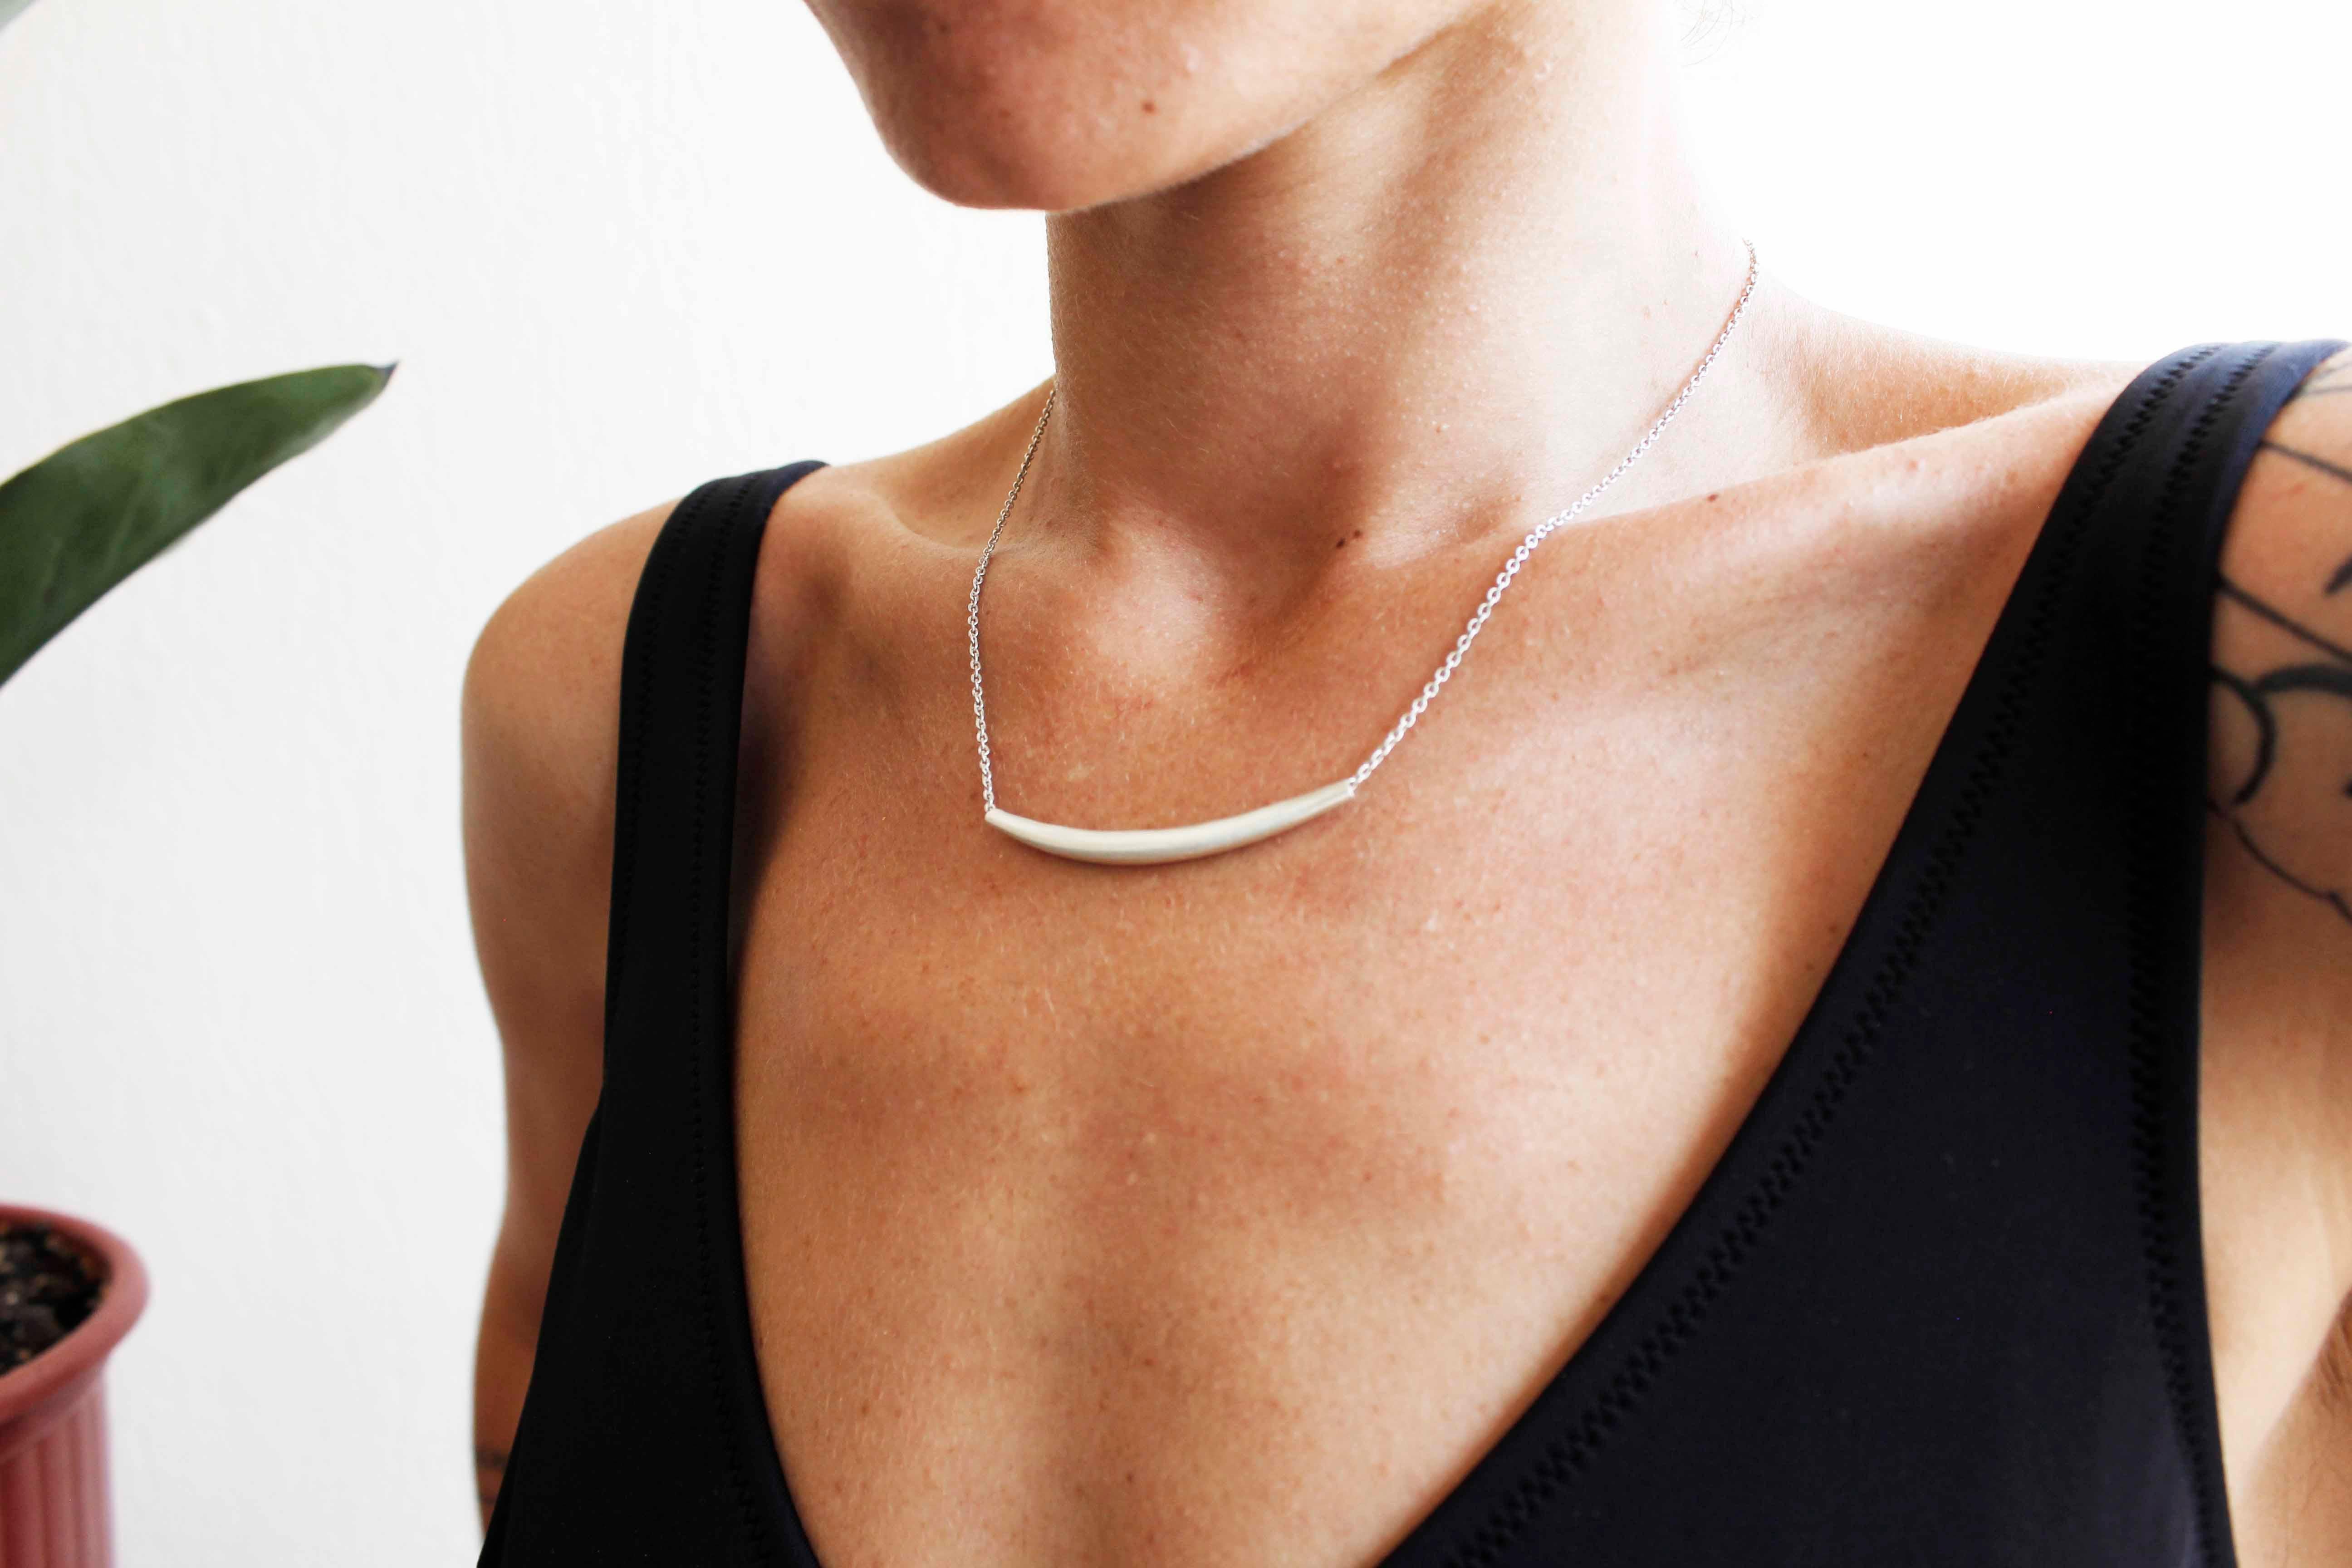 The Silver bar necklace is handmade from fine silver, and is great for layering.

A modern, curved free flowing tube that moves with you to always sit in place.

Bar length: 5cm
Chain length: 44cm